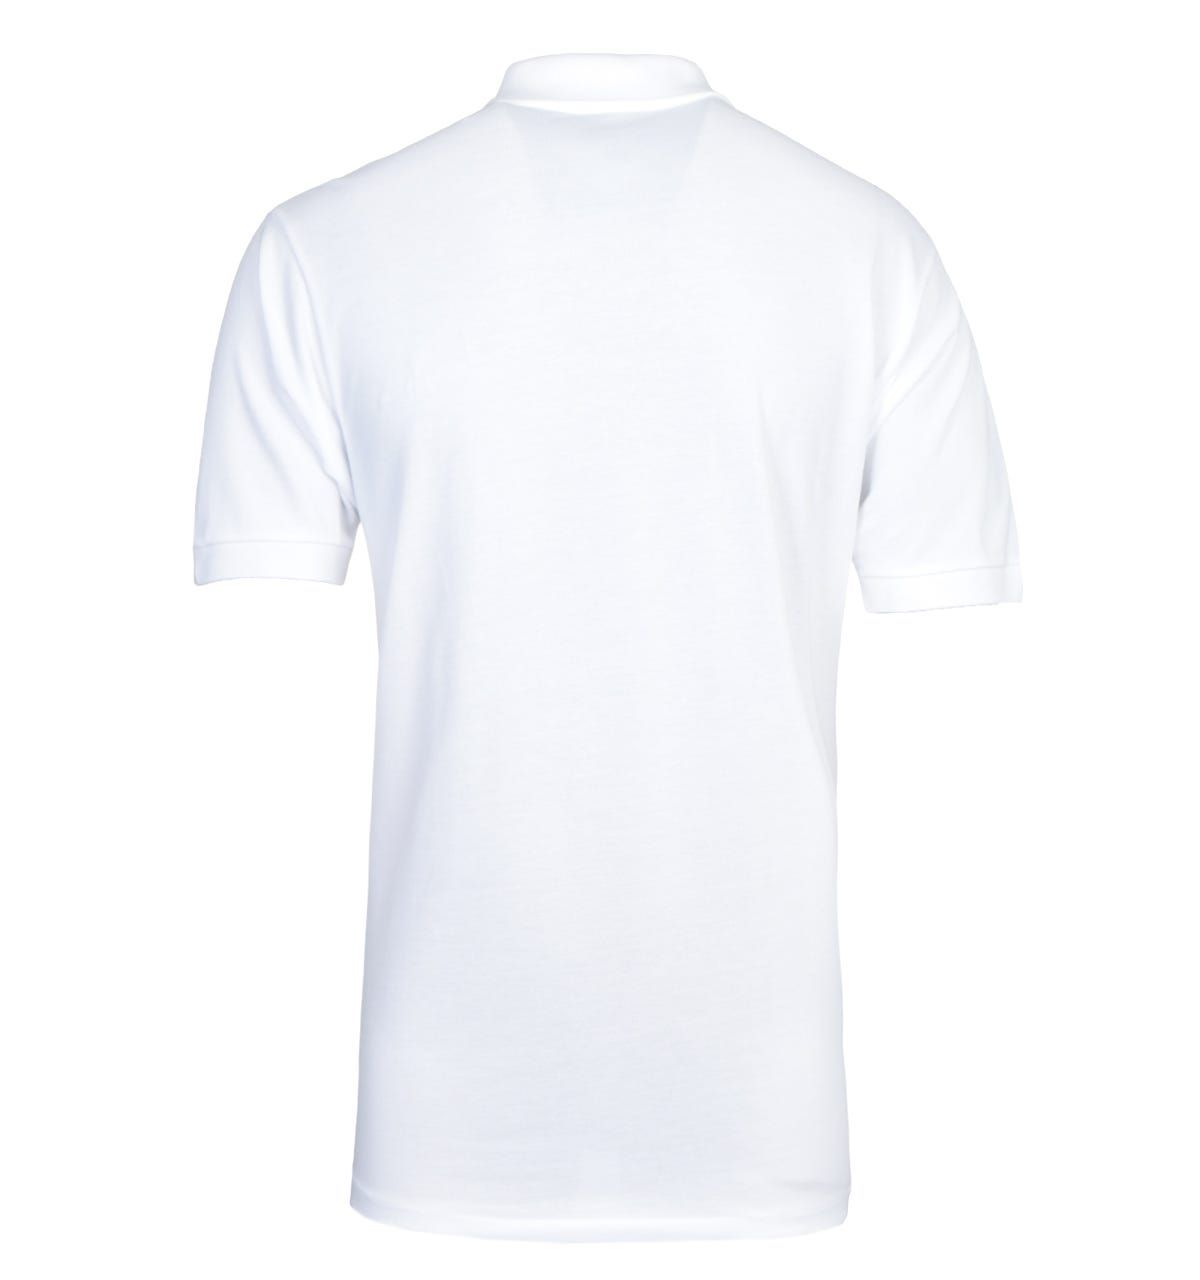 <p>Lacoste brings you an exclusive silhouette crafted from pure cotton. The Lacoste White MC Homme Polo Shirt featuring a two-button placket with a spread collar designed for a smart-casual style. Fitted with ribbed trims, this polo offers a super soft and lightweight feel on your skin with its premium cotton. The design is finished off with the iconic Lacoste logo embroidered on the chest.</p><ul><li>Cotton composition</li><li>Two button placket</li><li>Tonal stitching</li><li>Ribbed trims</li><li>Lacoste logo embroidered on chest</li></ul><p>Style & Fit:</p><ul><li>Regular fit</li><li>Fits true to size</li></ul><p>Fabric Composition & Care:</p><ul><li>100% Cotton</li><li>Machine washable</li></ul>